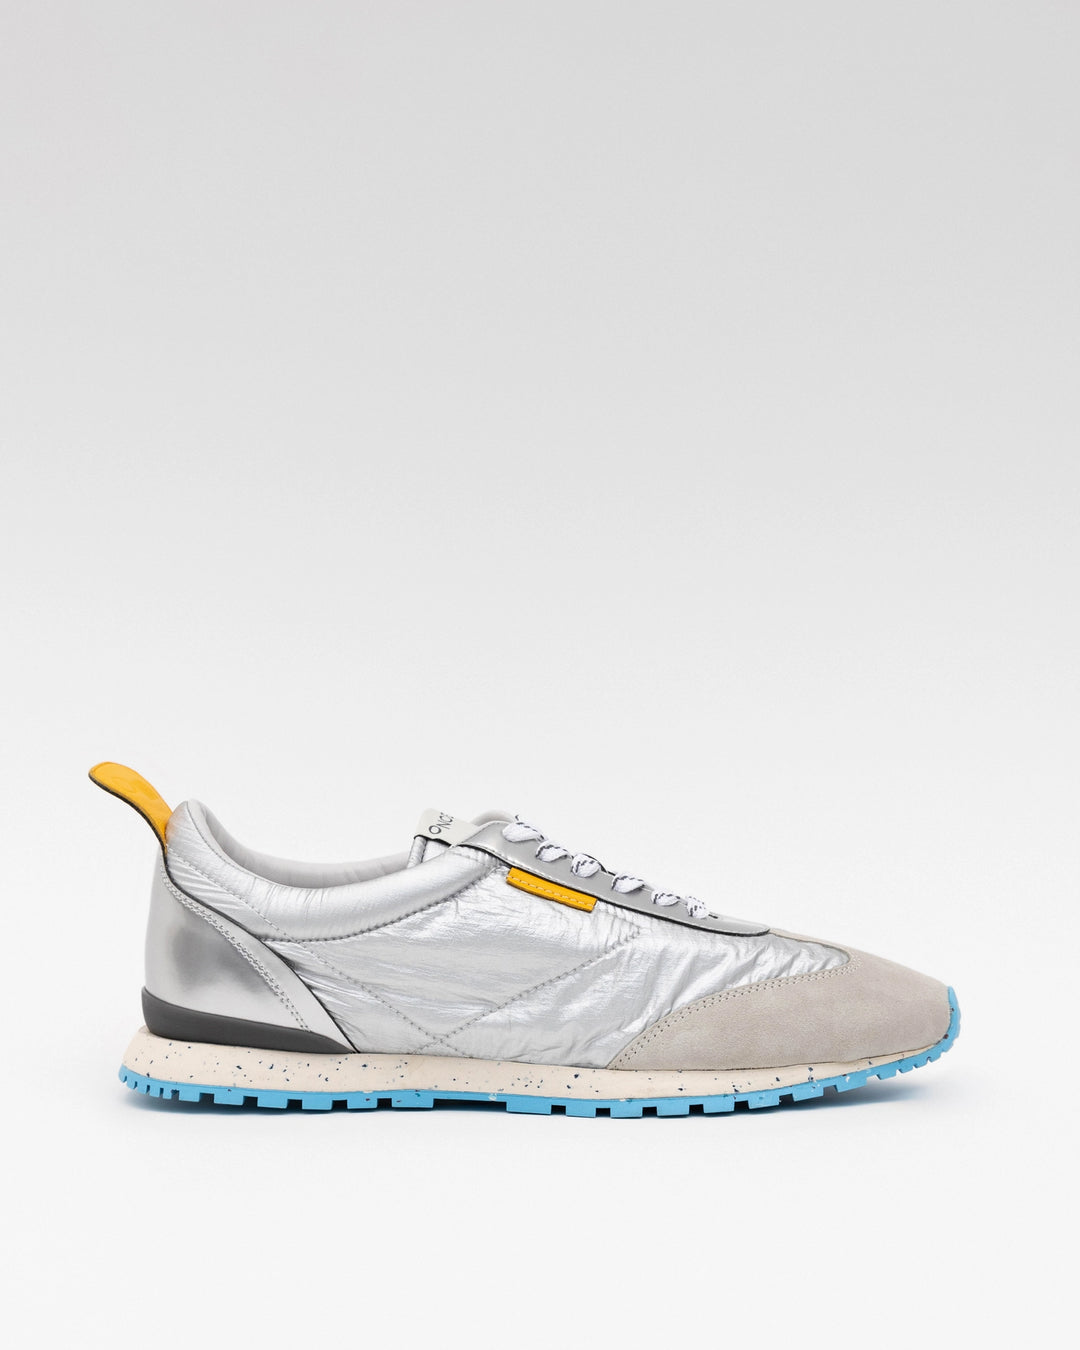 Oncept - Tokyo Sneaker in metallic is a great addition to your everyday sneaker collection. These sustainable water resistant nylon, chrome free suede, re-speckled midsole and tencel twill linings add the conscious effort to your wardrobe 